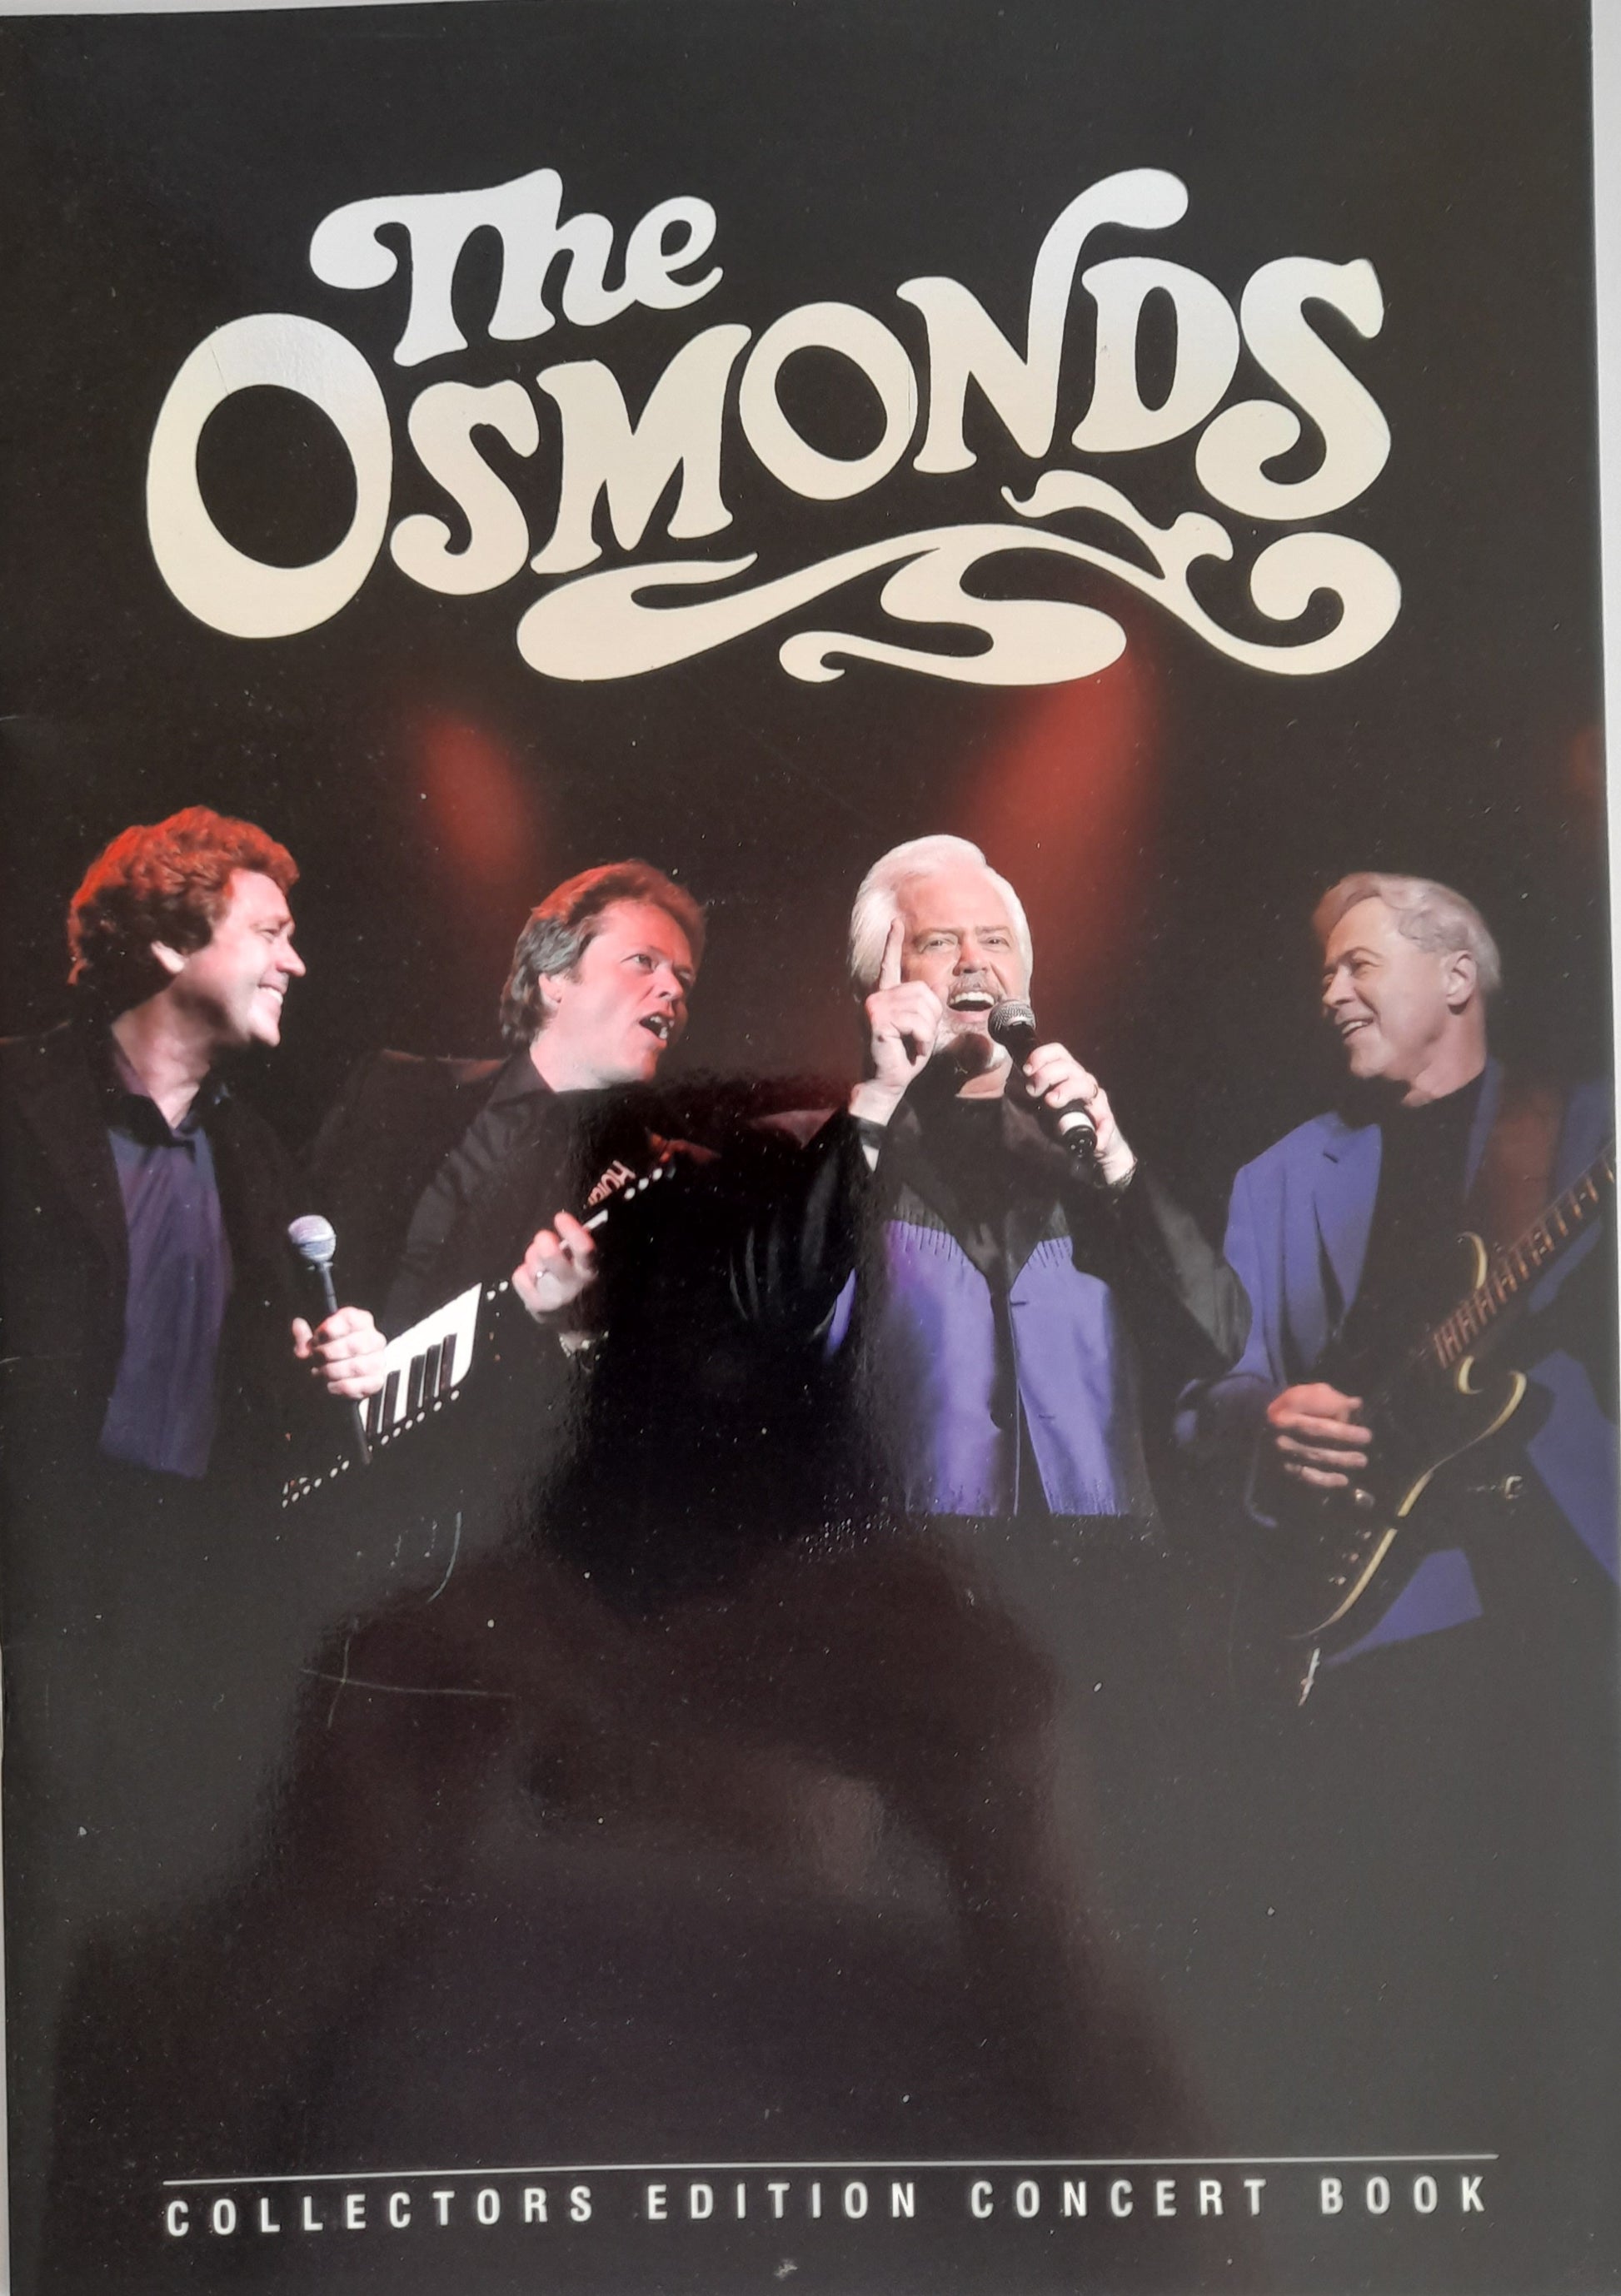 The Osmonds Collectors Edition Concert Book